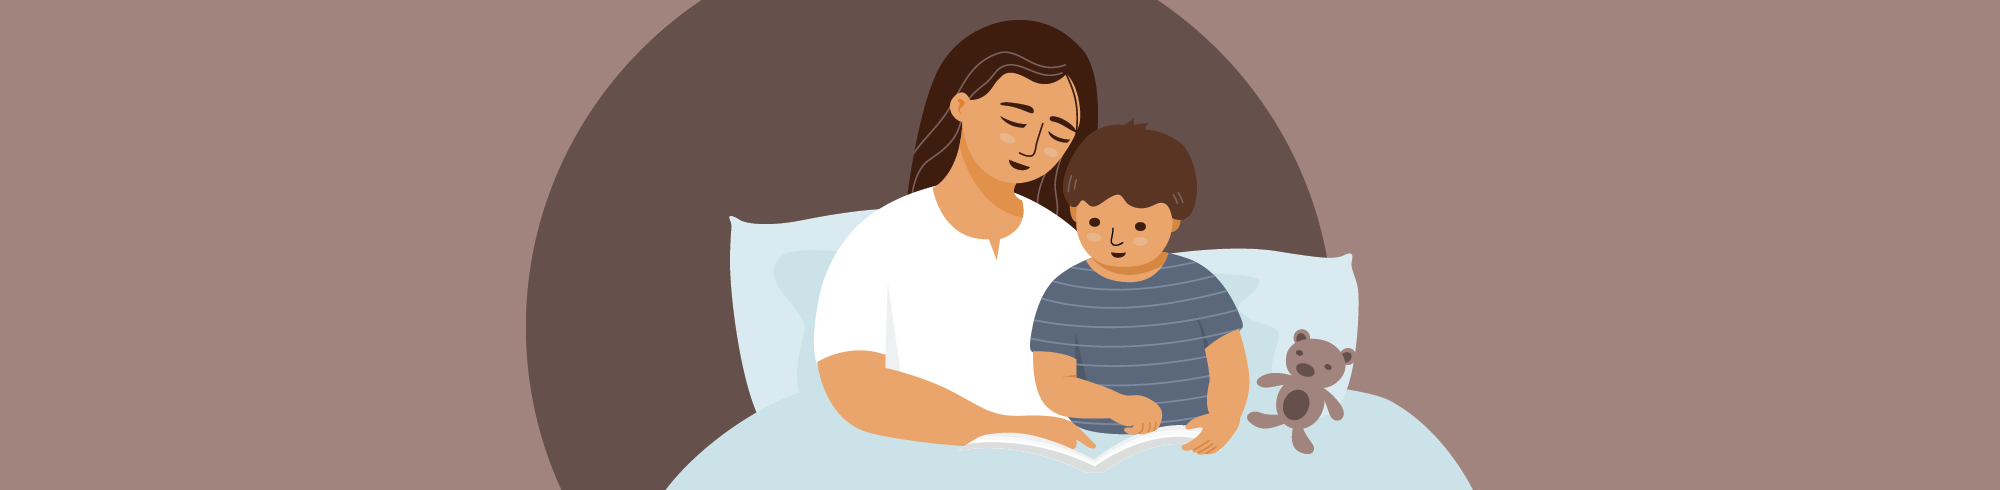 illustration of a woman and a child reading a book together in bed